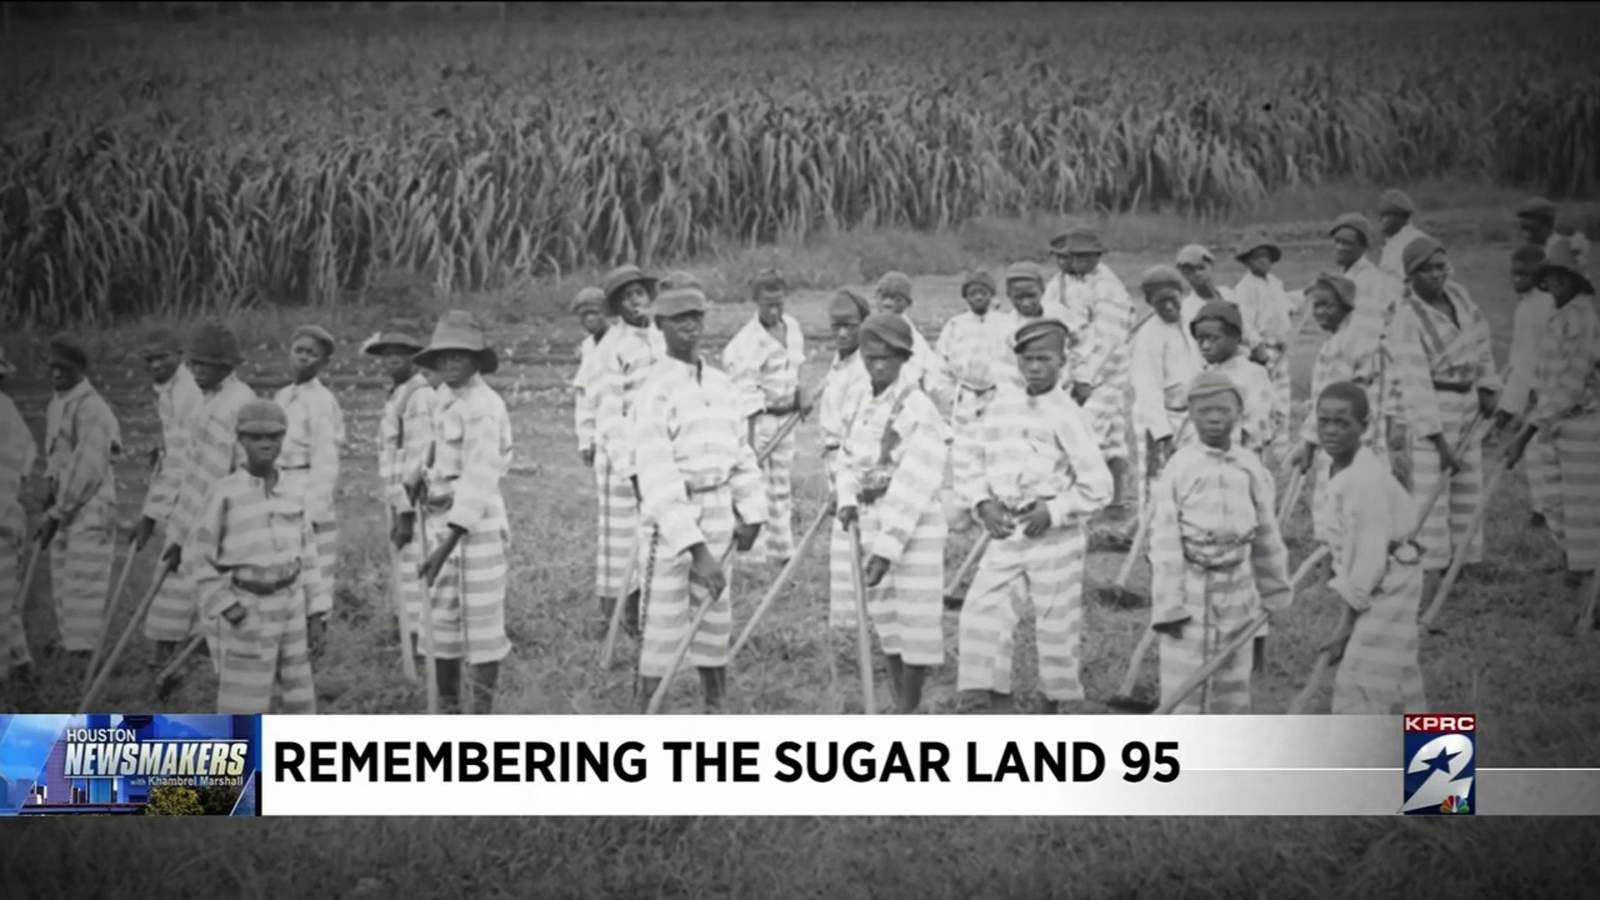 Houston Newsmakers: The cruel tragedy of the Sugar Land 95